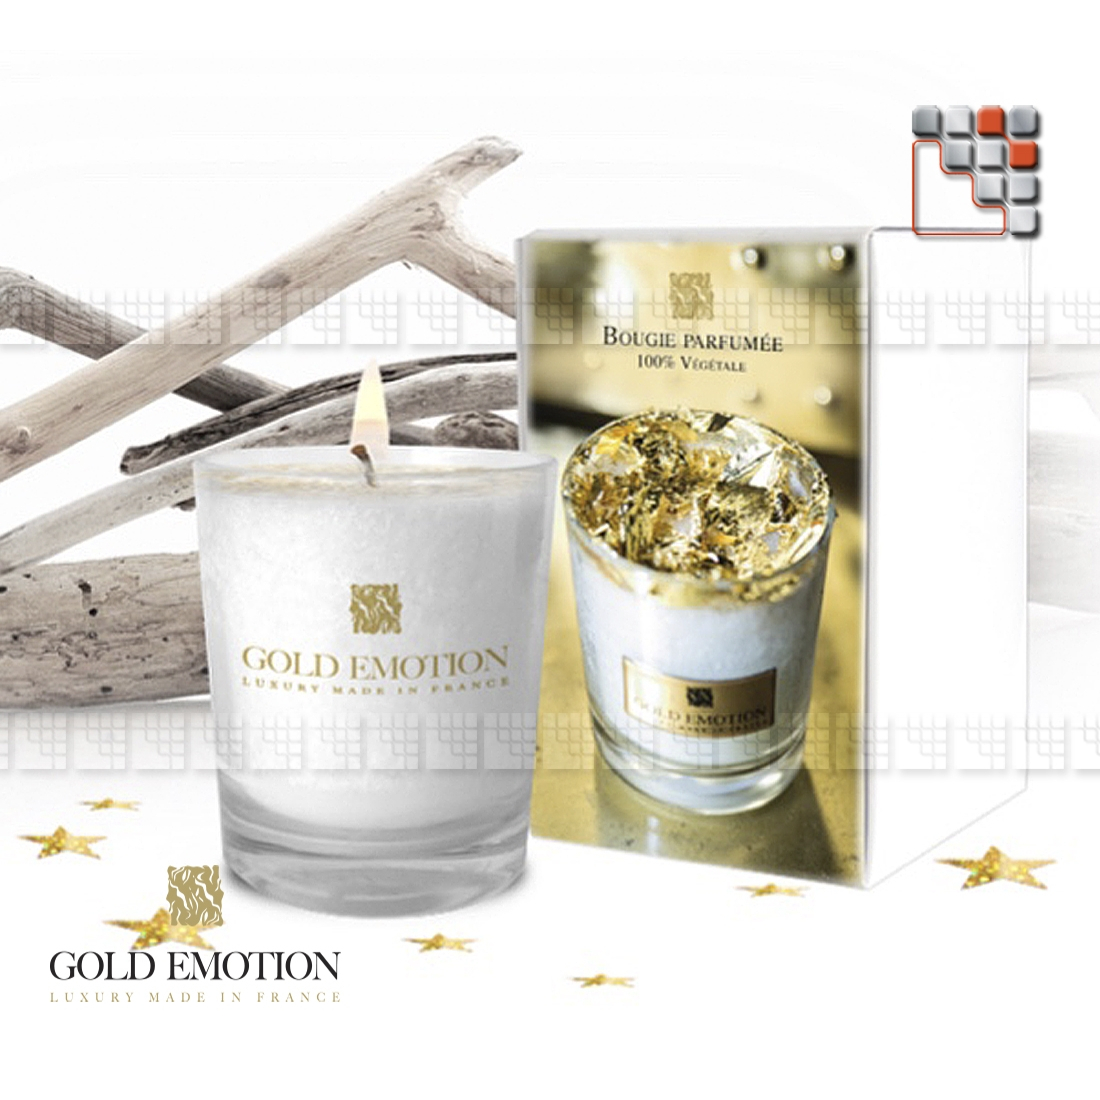 Scented candle 24k GoldEmotion G03-ORB GoldEmotion Gift Ideas